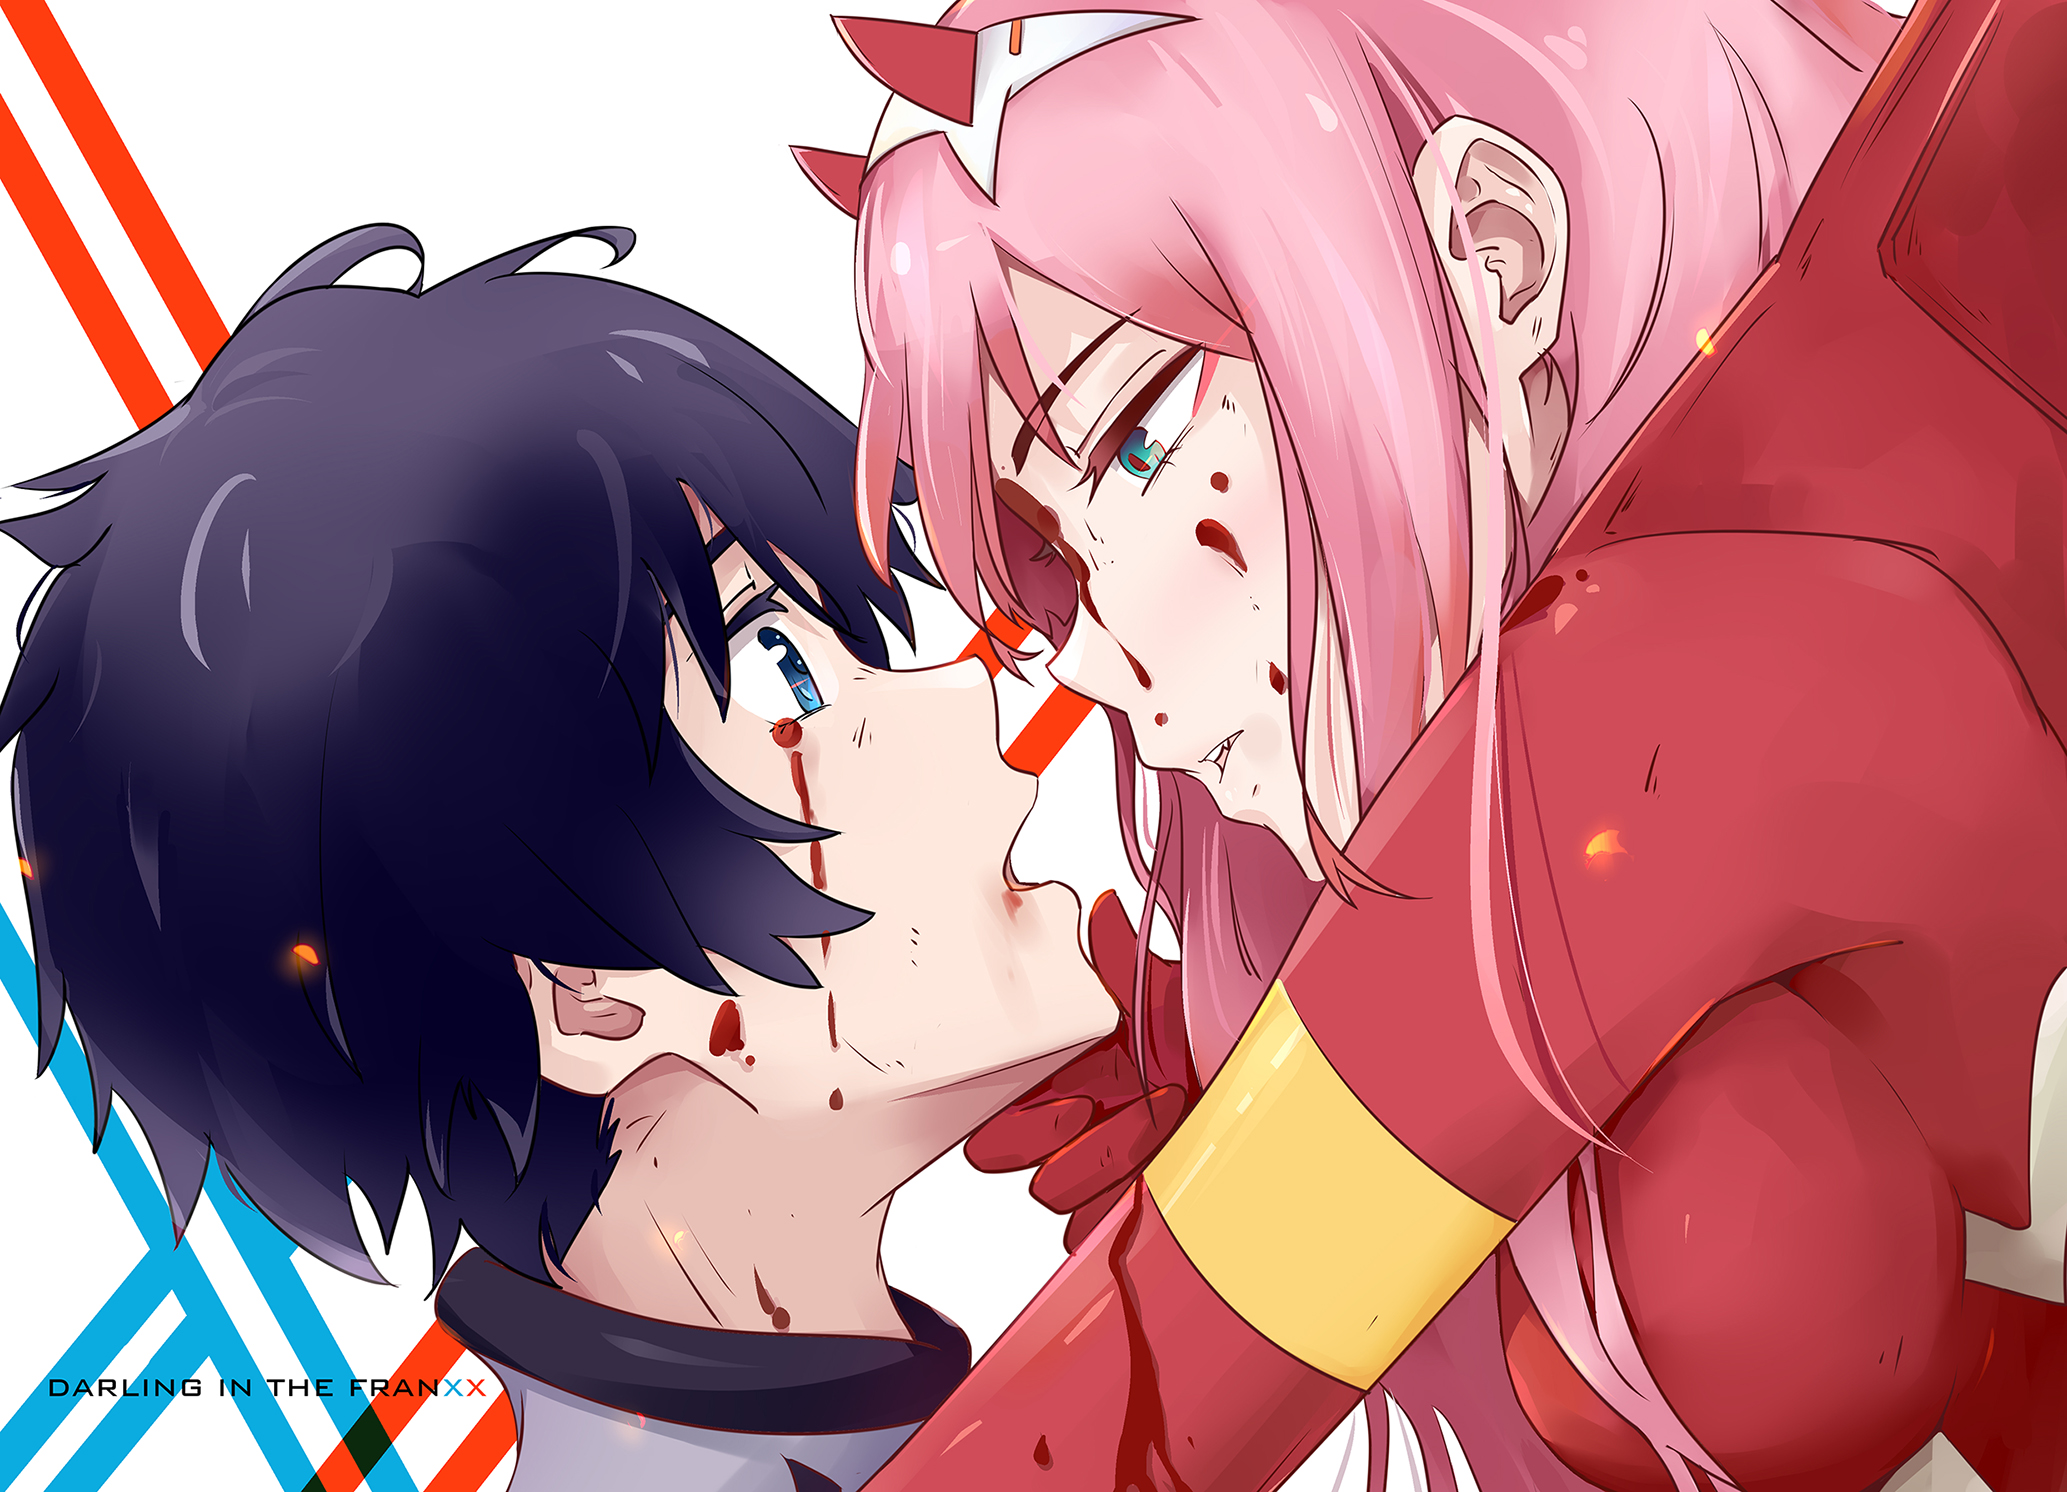 Popular Hiro (Darling In The Franxx) Image for Phone